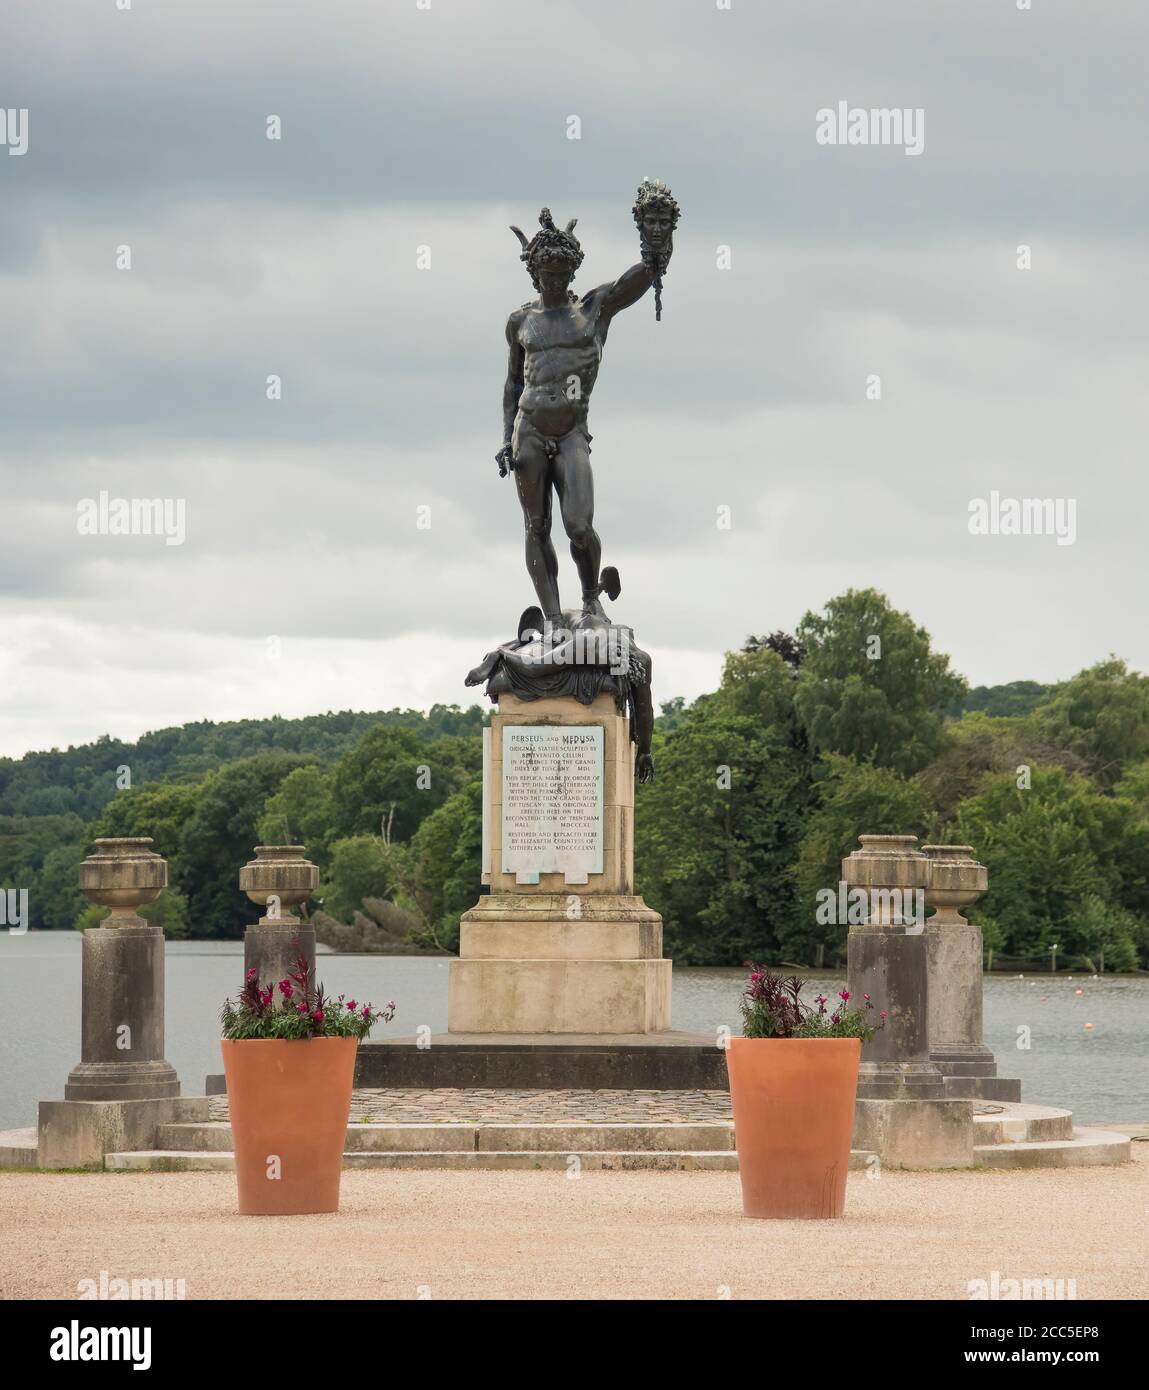 A statue of Perseus holding the head of Medusa created by Benvenuto Cellini on display in  Trentham Italian Gardens Staffordshire England UK Stock Photo